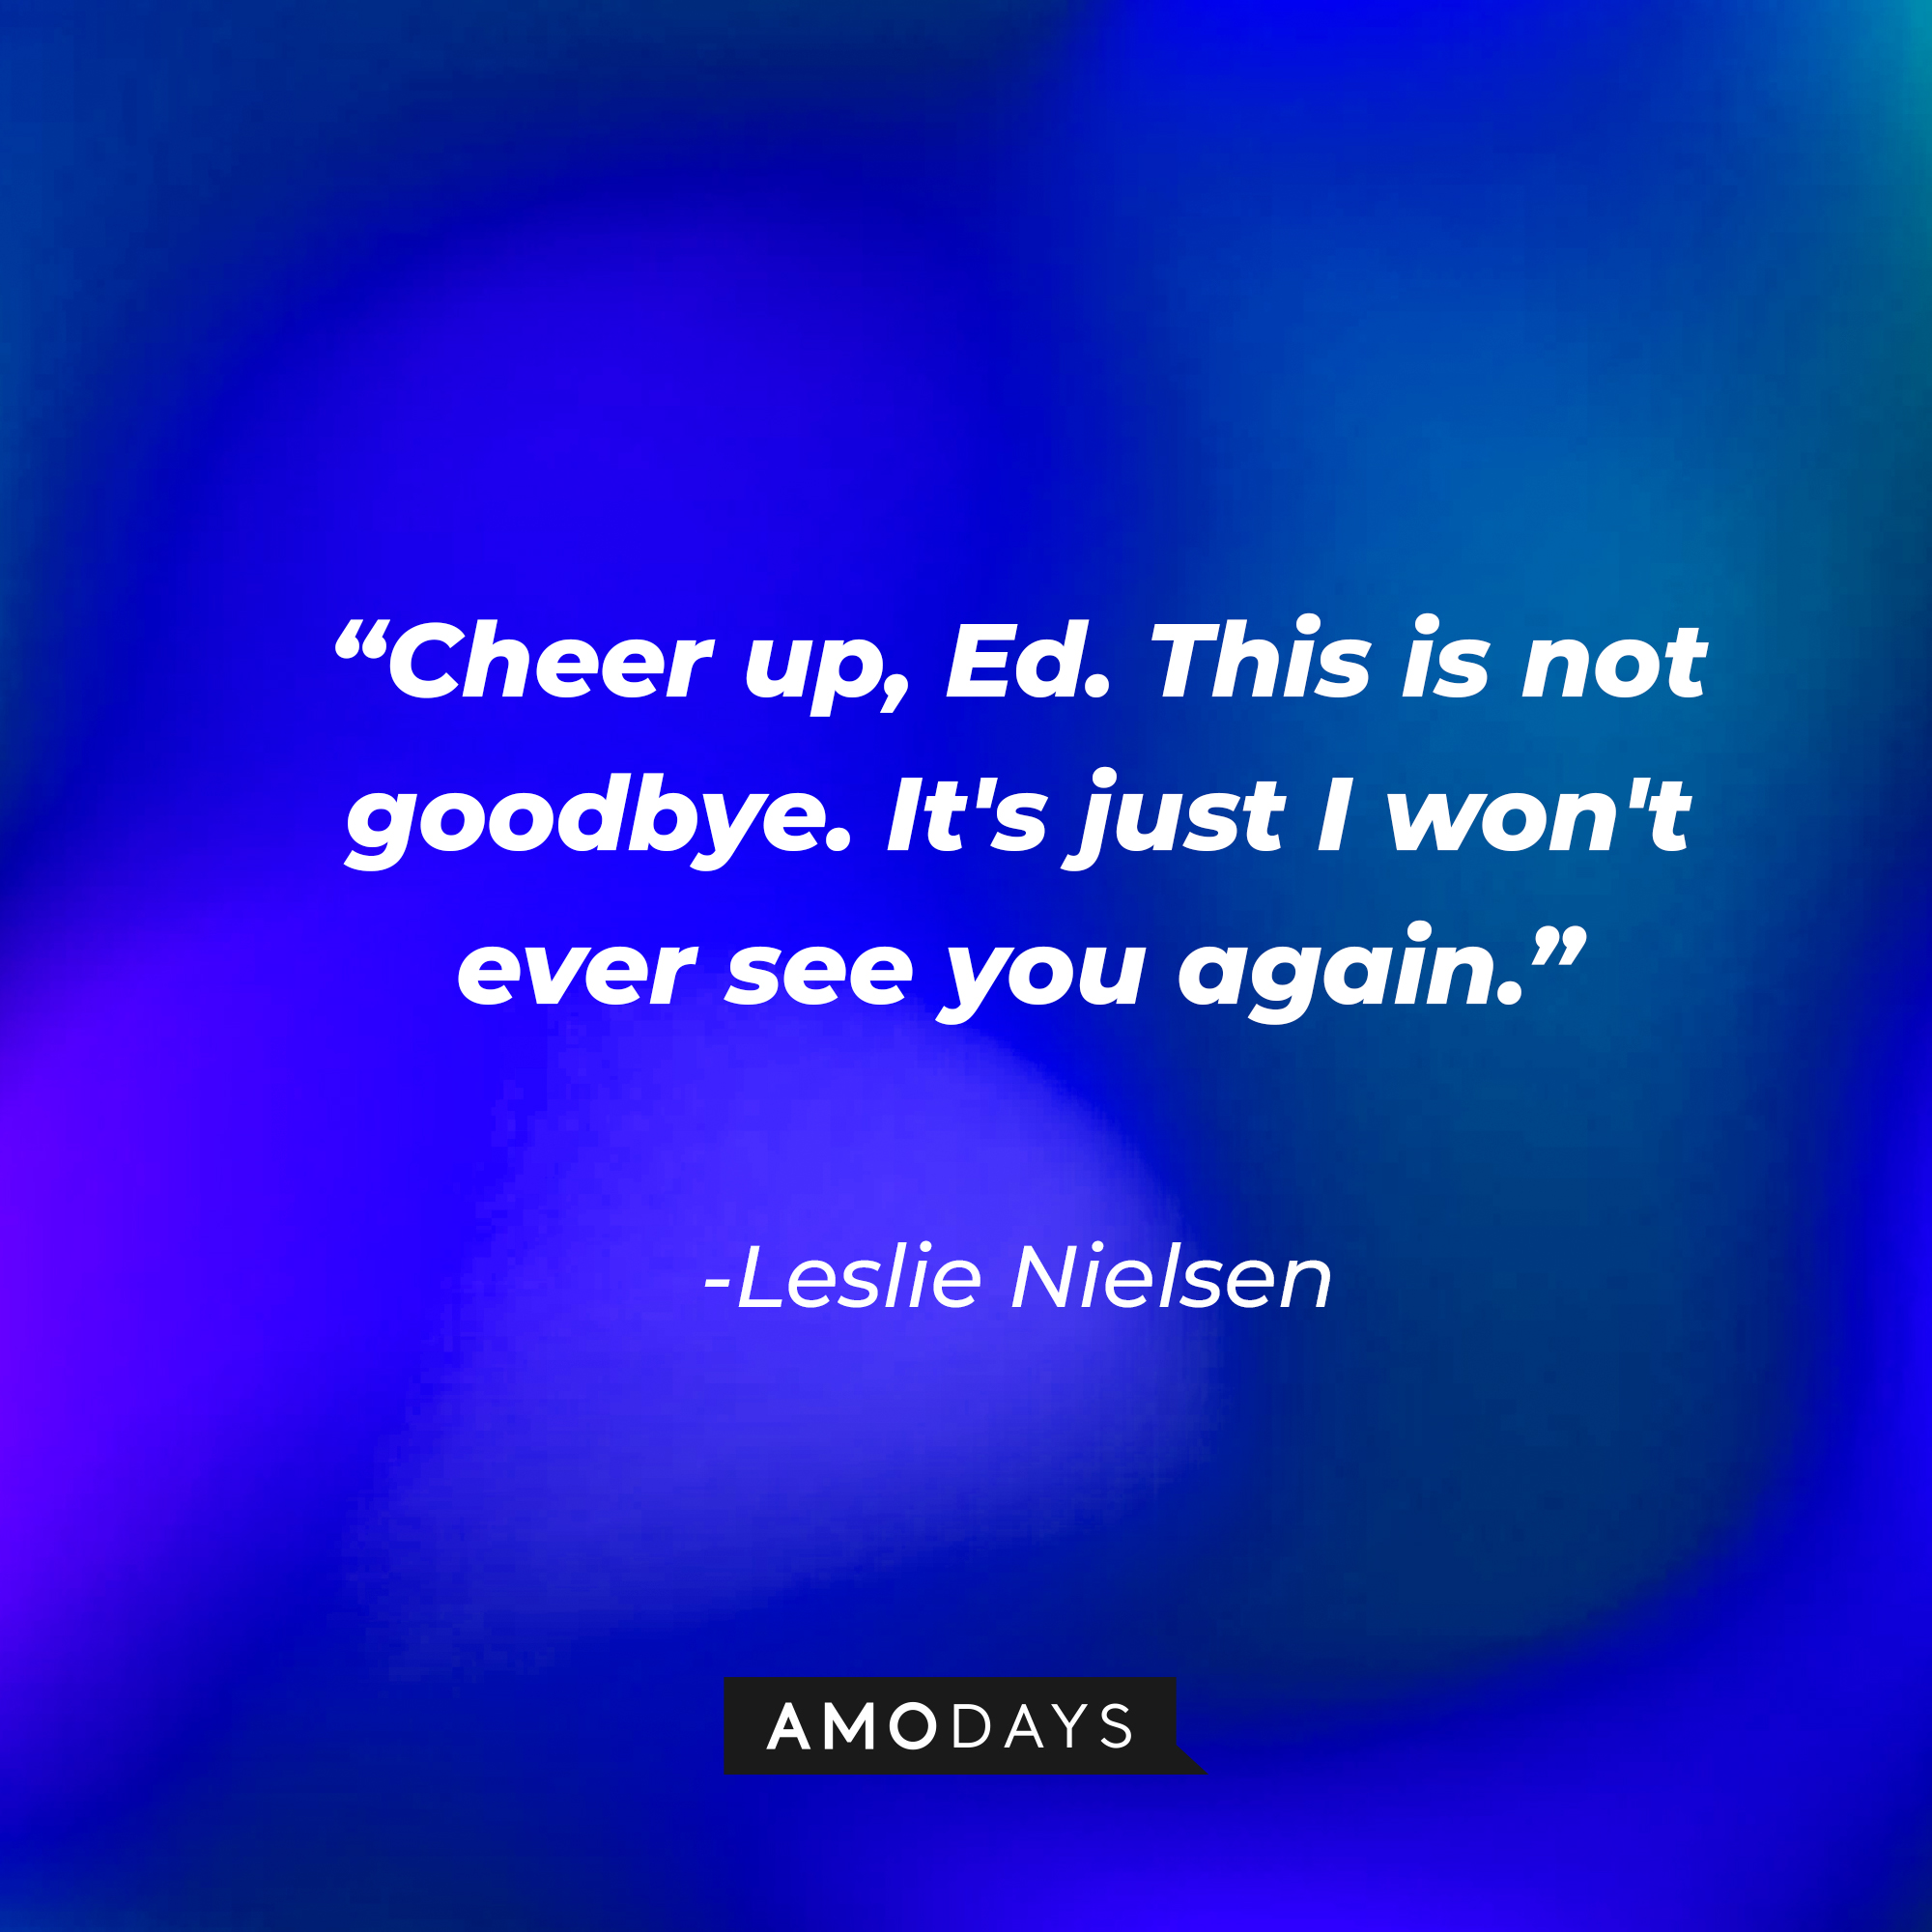 Leslie Nielsen's quote: “Cheer up, Ed. This is not goodbye. It's just I won't ever see you again.” | Source: Amodays